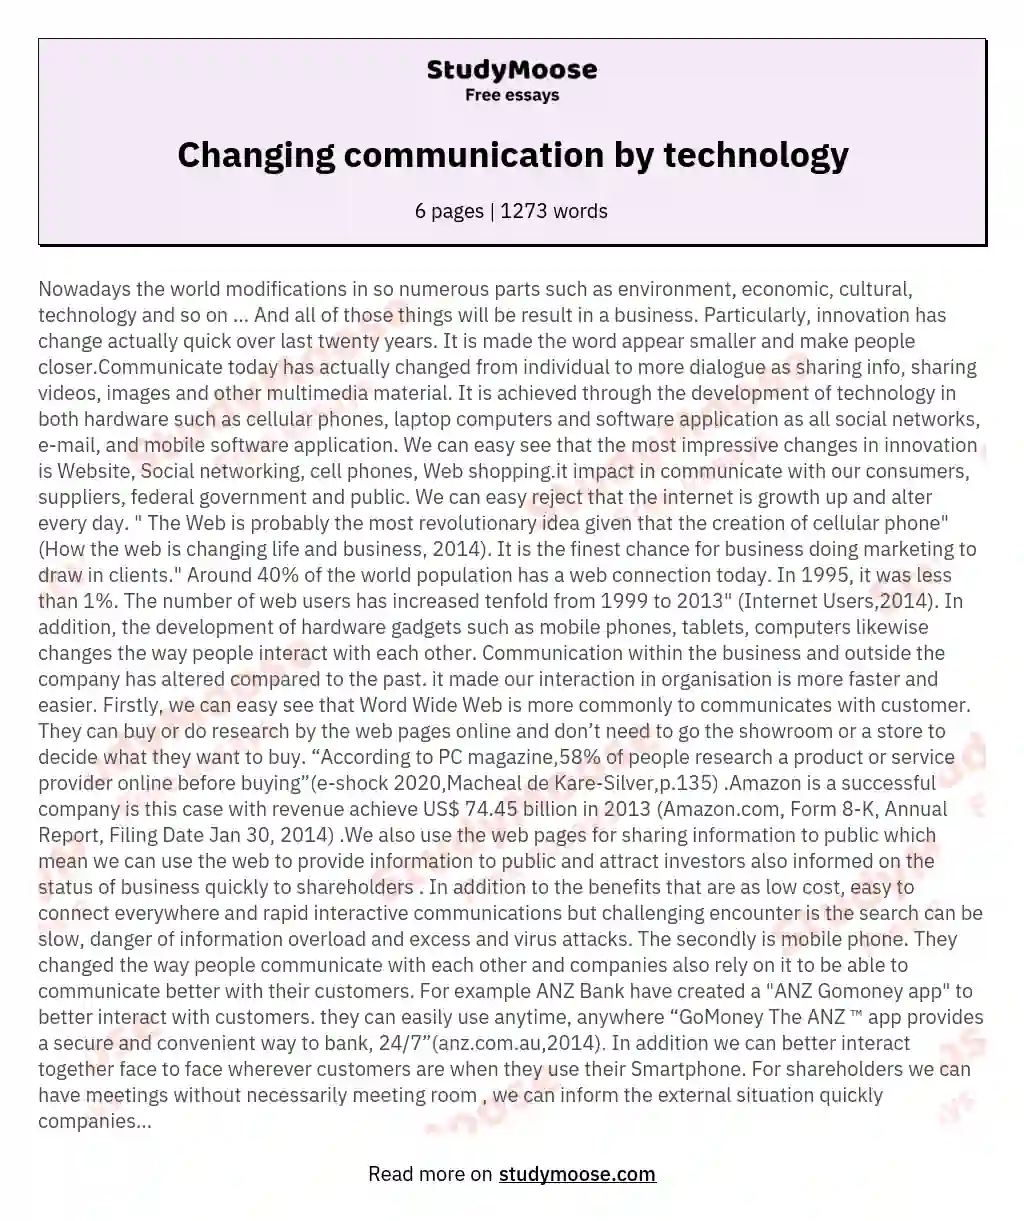 Changing communication by technology essay